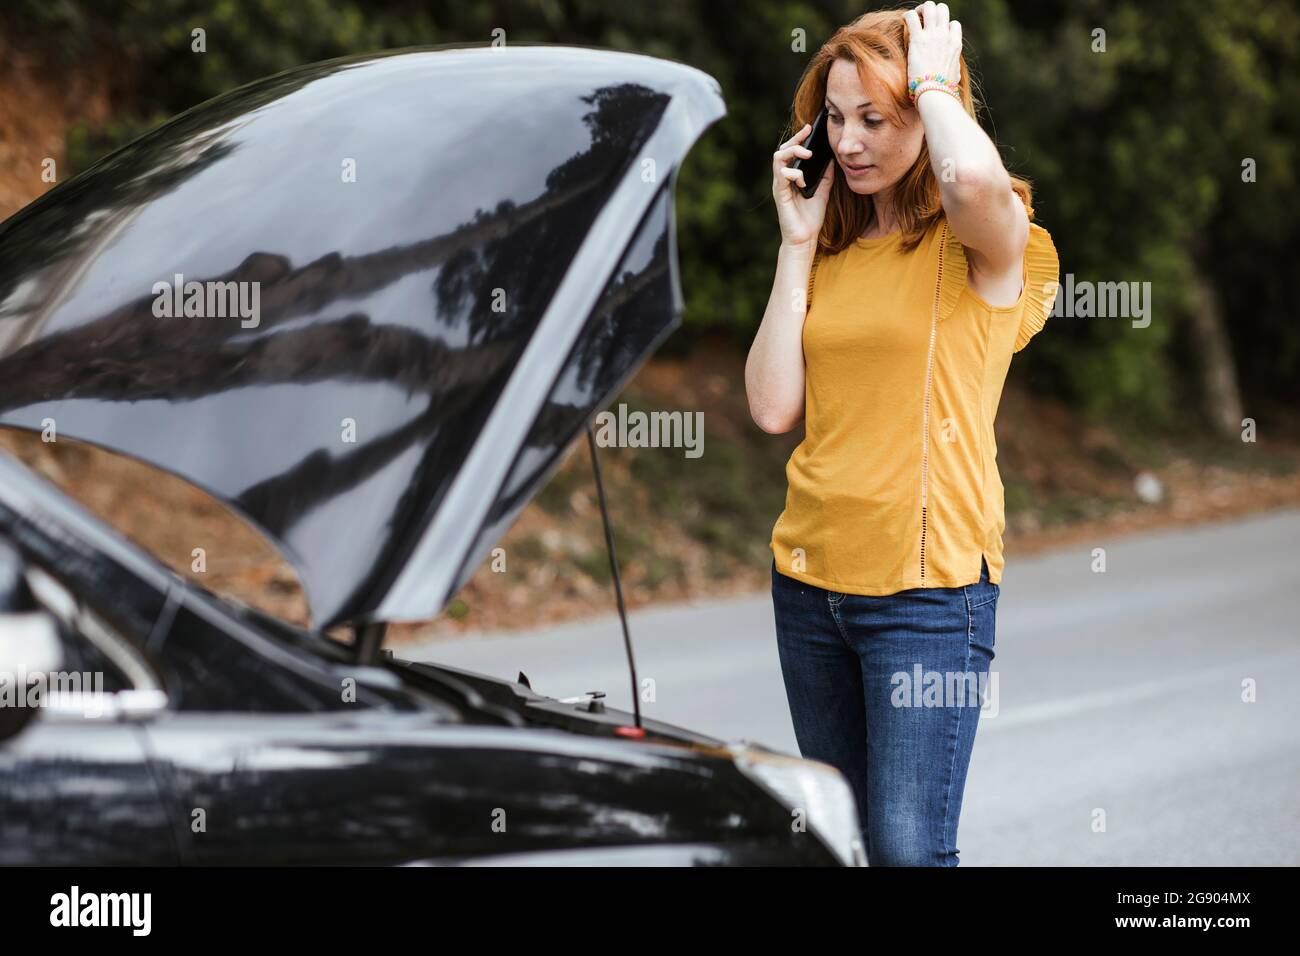 Confused woman scratching head while talking on mobile phone by car Stock Photo